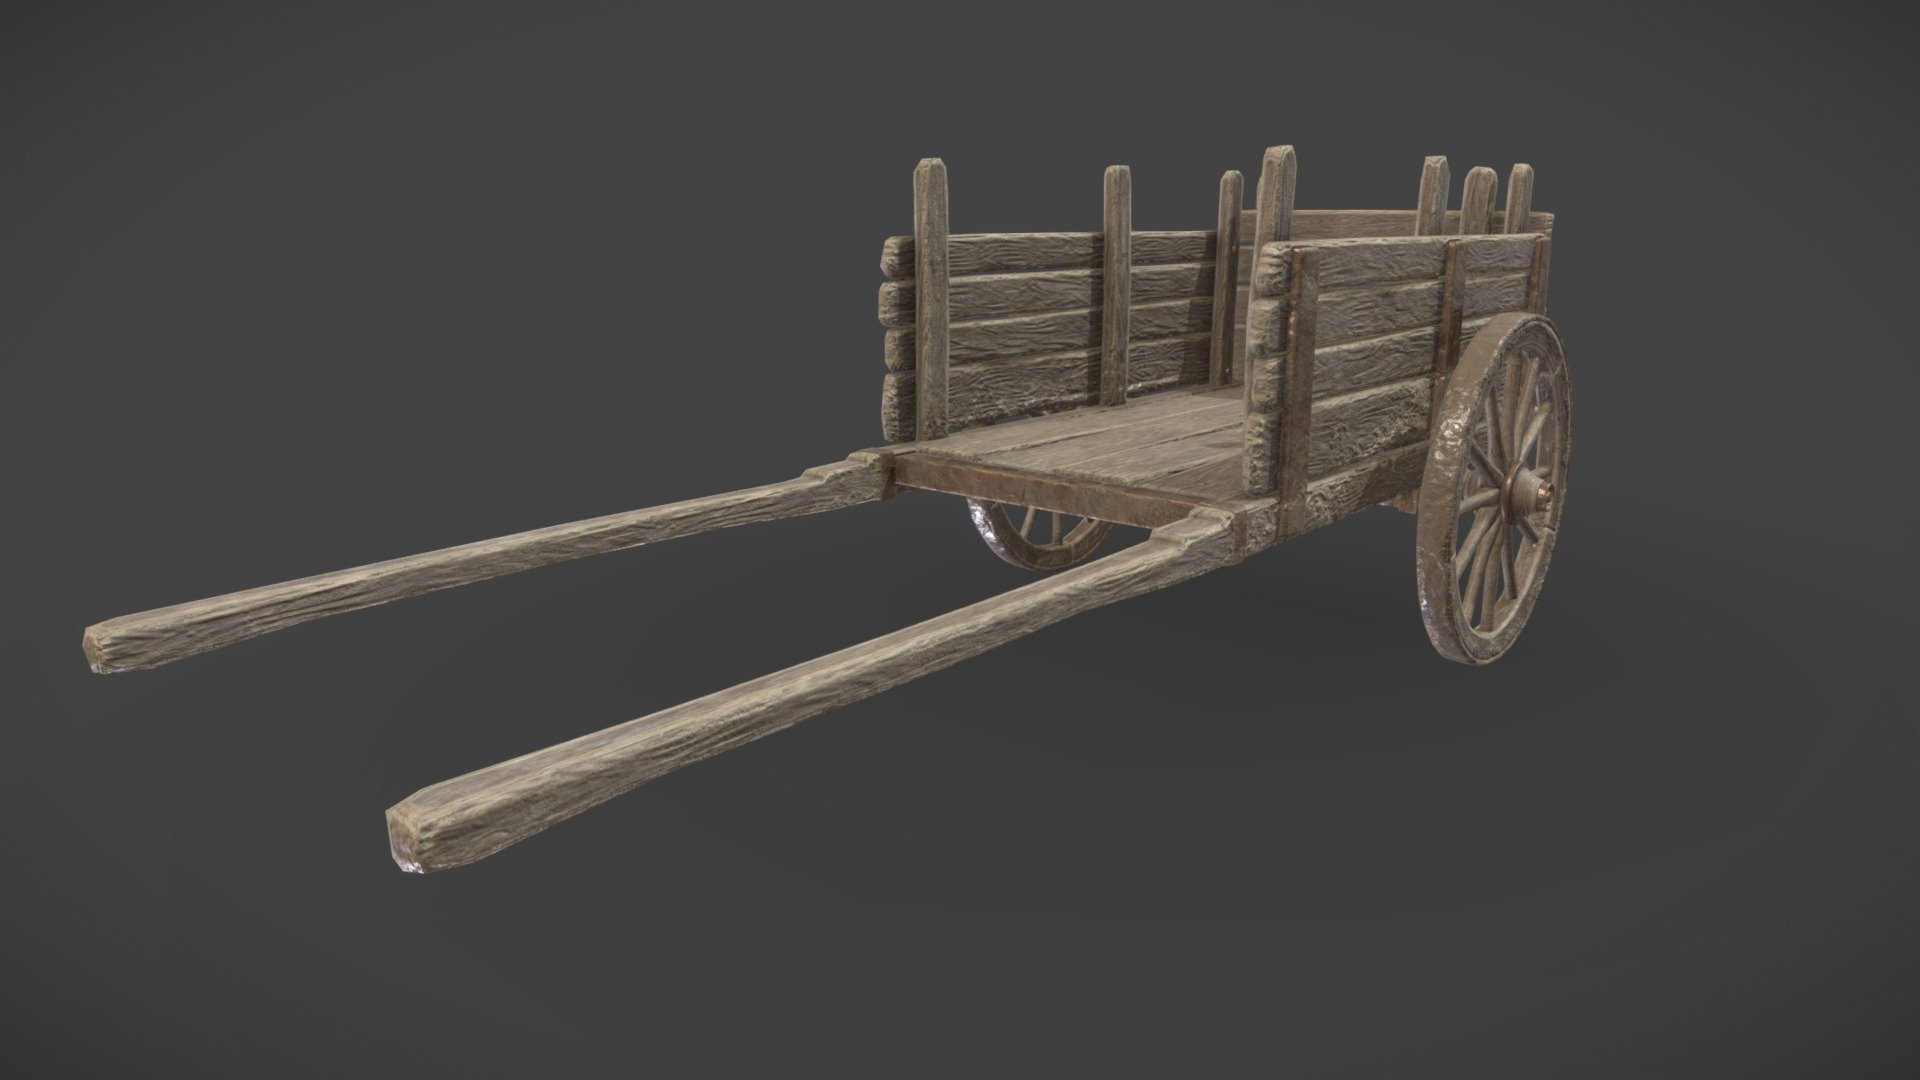 Game ready wooden cart

Medieval themed

Modelled in 3DS Max
Textured in Substance Painter

Please feel free to leave feedback - Wooden Cart - Muddy - 3D model by JamesDawson (@JamBoink) 3d model